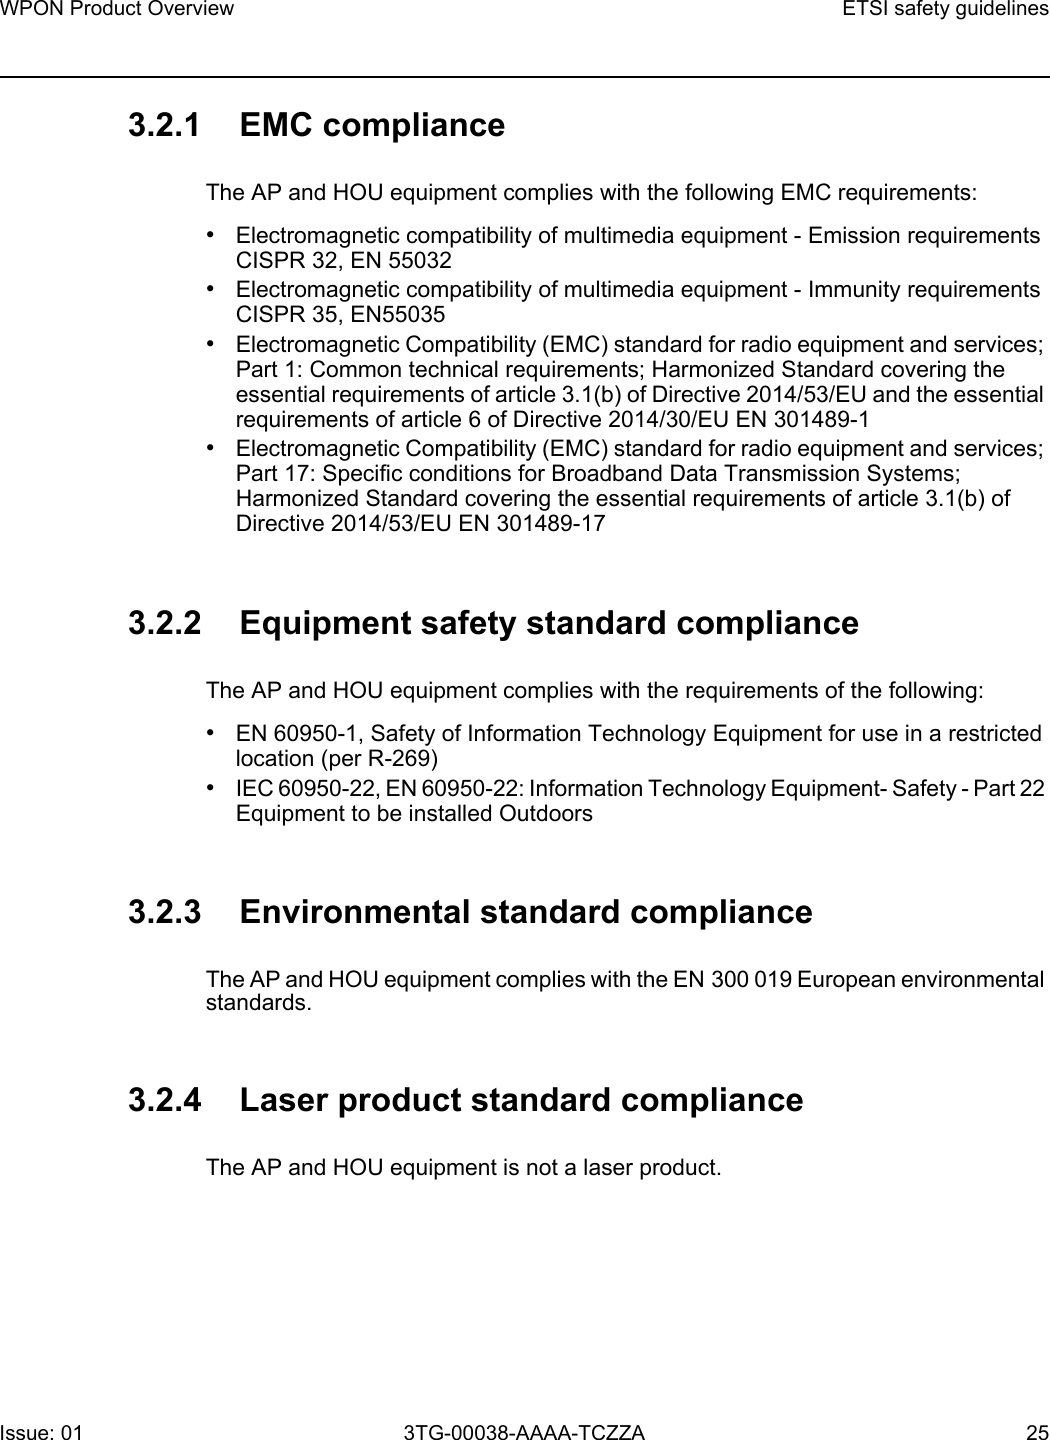 WPON Product Overview ETSI safety guidelinesIssue: 01 3TG-00038-AAAA-TCZZA 25 3.2.1 EMC complianceThe AP and HOU equipment complies with the following EMC requirements:•Electromagnetic compatibility of multimedia equipment - Emission requirements CISPR 32, EN 55032•Electromagnetic compatibility of multimedia equipment - Immunity requirements CISPR 35, EN55035•Electromagnetic Compatibility (EMC) standard for radio equipment and services; Part 1: Common technical requirements; Harmonized Standard covering the essential requirements of article 3.1(b) of Directive 2014/53/EU and the essential requirements of article 6 of Directive 2014/30/EU EN 301489-1•Electromagnetic Compatibility (EMC) standard for radio equipment and services; Part 17: Specific conditions for Broadband Data Transmission Systems; Harmonized Standard covering the essential requirements of article 3.1(b) of Directive 2014/53/EU EN 301489-173.2.2 Equipment safety standard complianceThe AP and HOU equipment complies with the requirements of the following: •EN 60950-1, Safety of Information Technology Equipment for use in a restricted location (per R-269)•IEC 60950-22, EN 60950-22: Information Technology Equipment- Safety - Part 22 Equipment to be installed Outdoors3.2.3 Environmental standard complianceThe AP and HOU equipment complies with the EN 300 019 European environmental standards.3.2.4 Laser product standard complianceThe AP and HOU equipment is not a laser product.